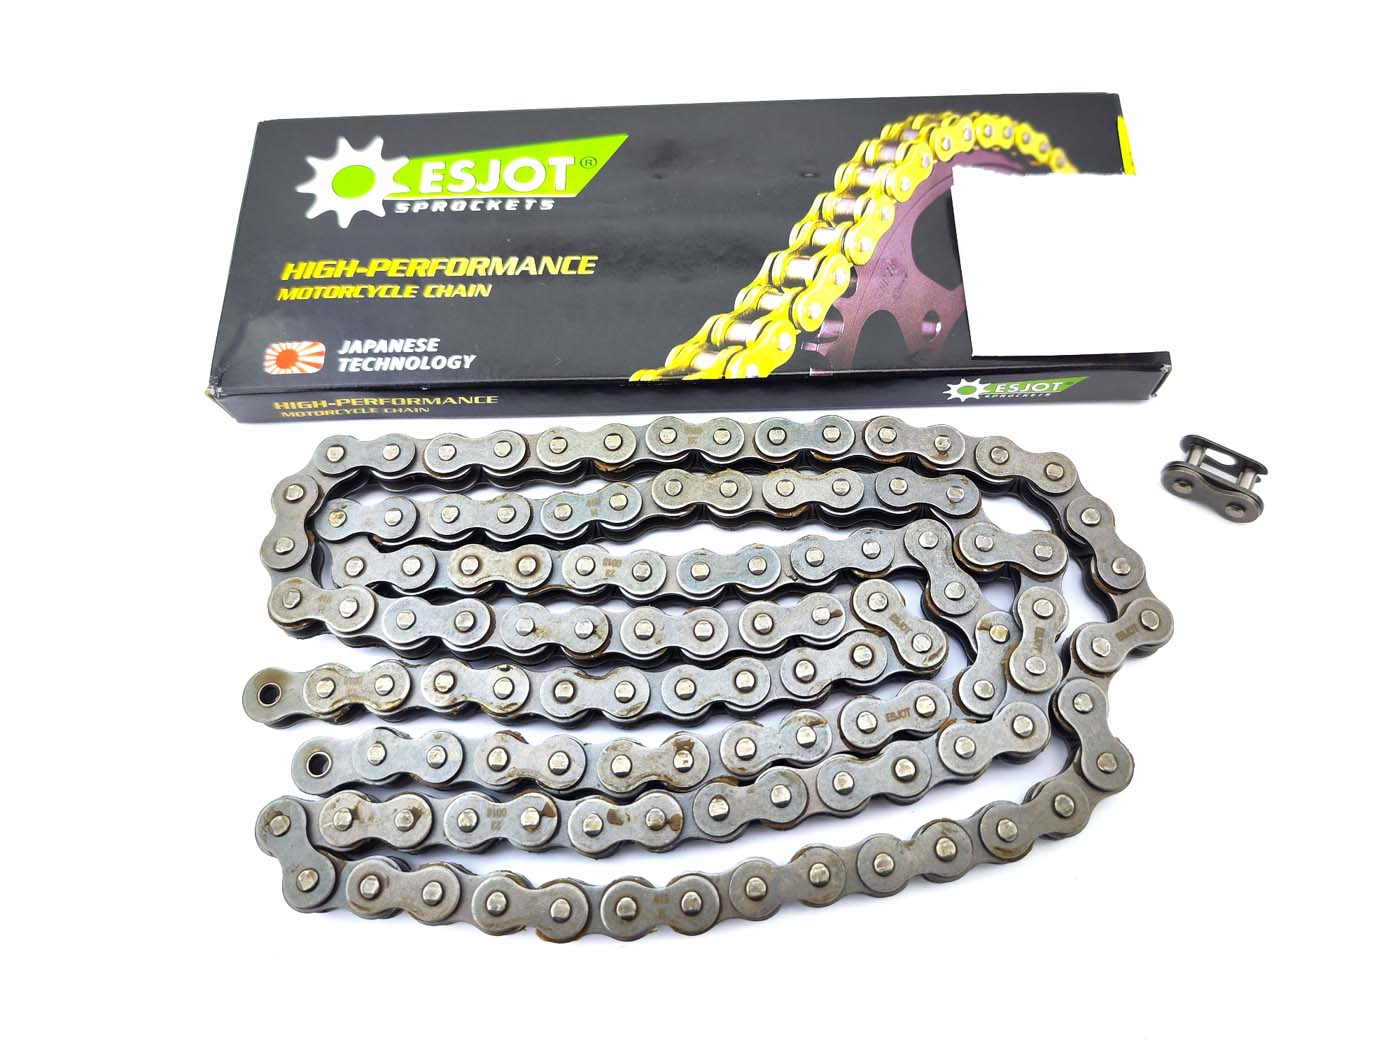 Chain Esjot 98 Links For Puch Maxi S SP Moped Moped